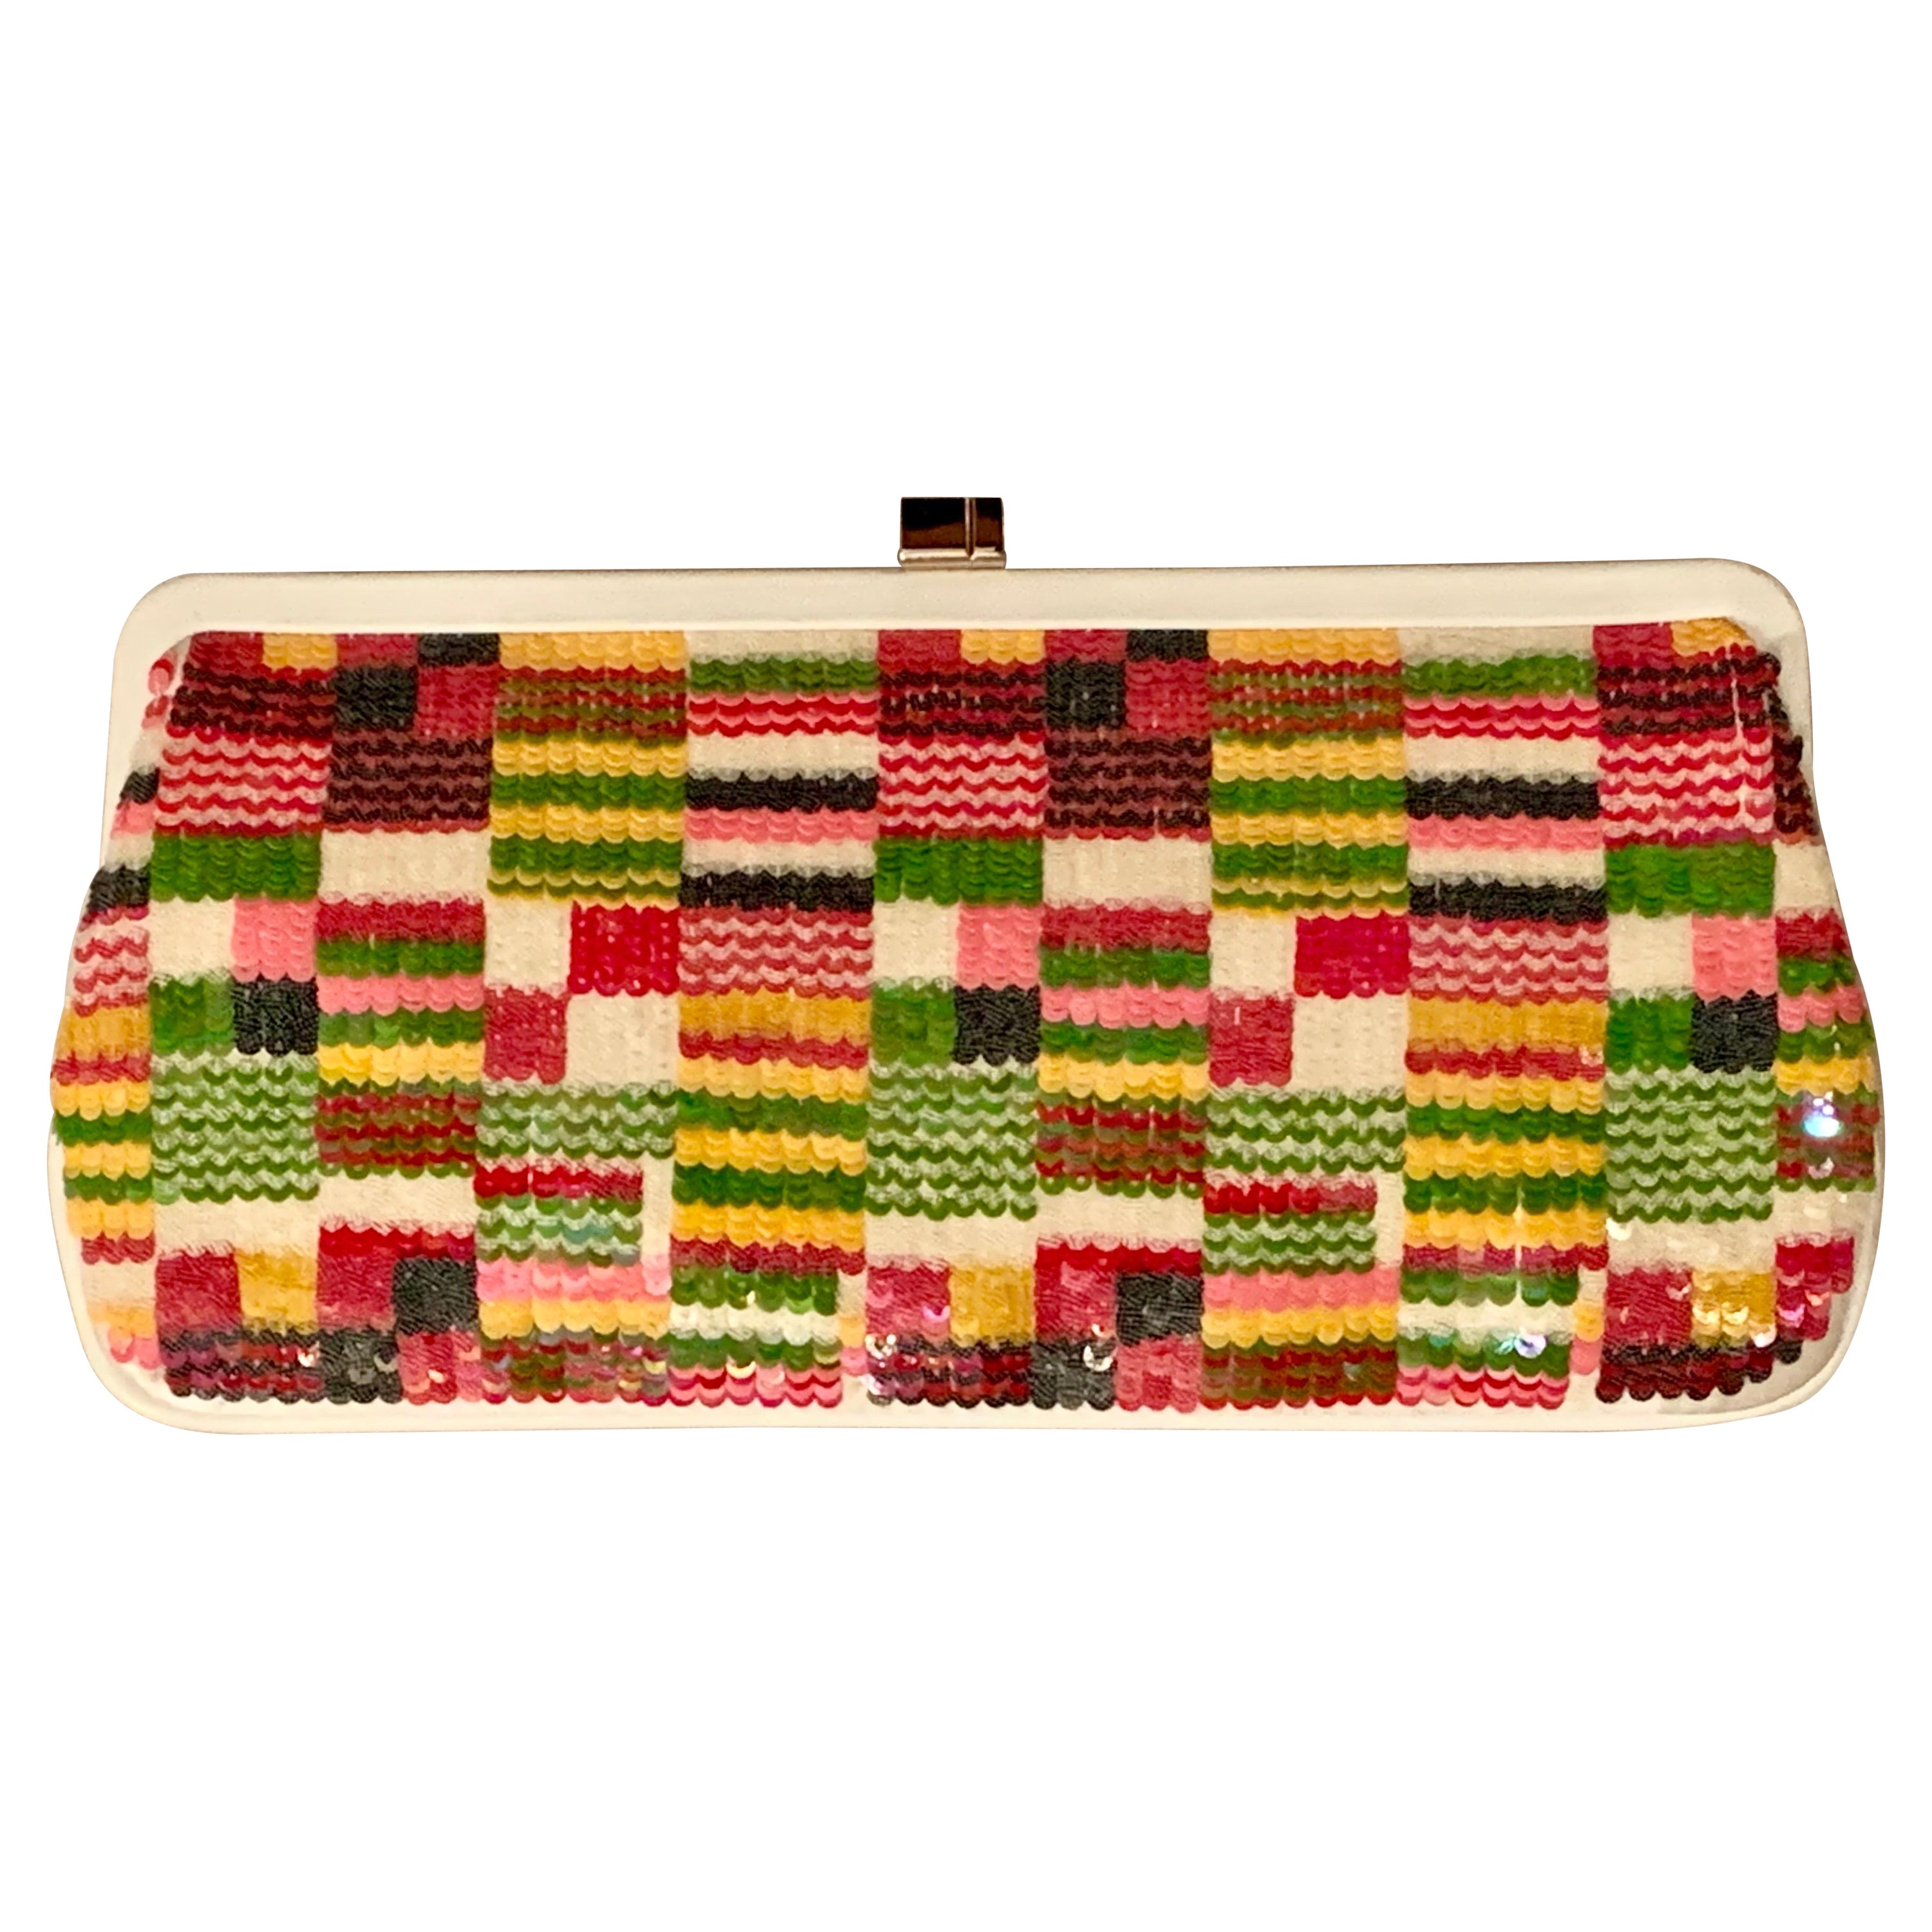 Lambertson Truex Leather and Multi Color Sequin Clutch Bag